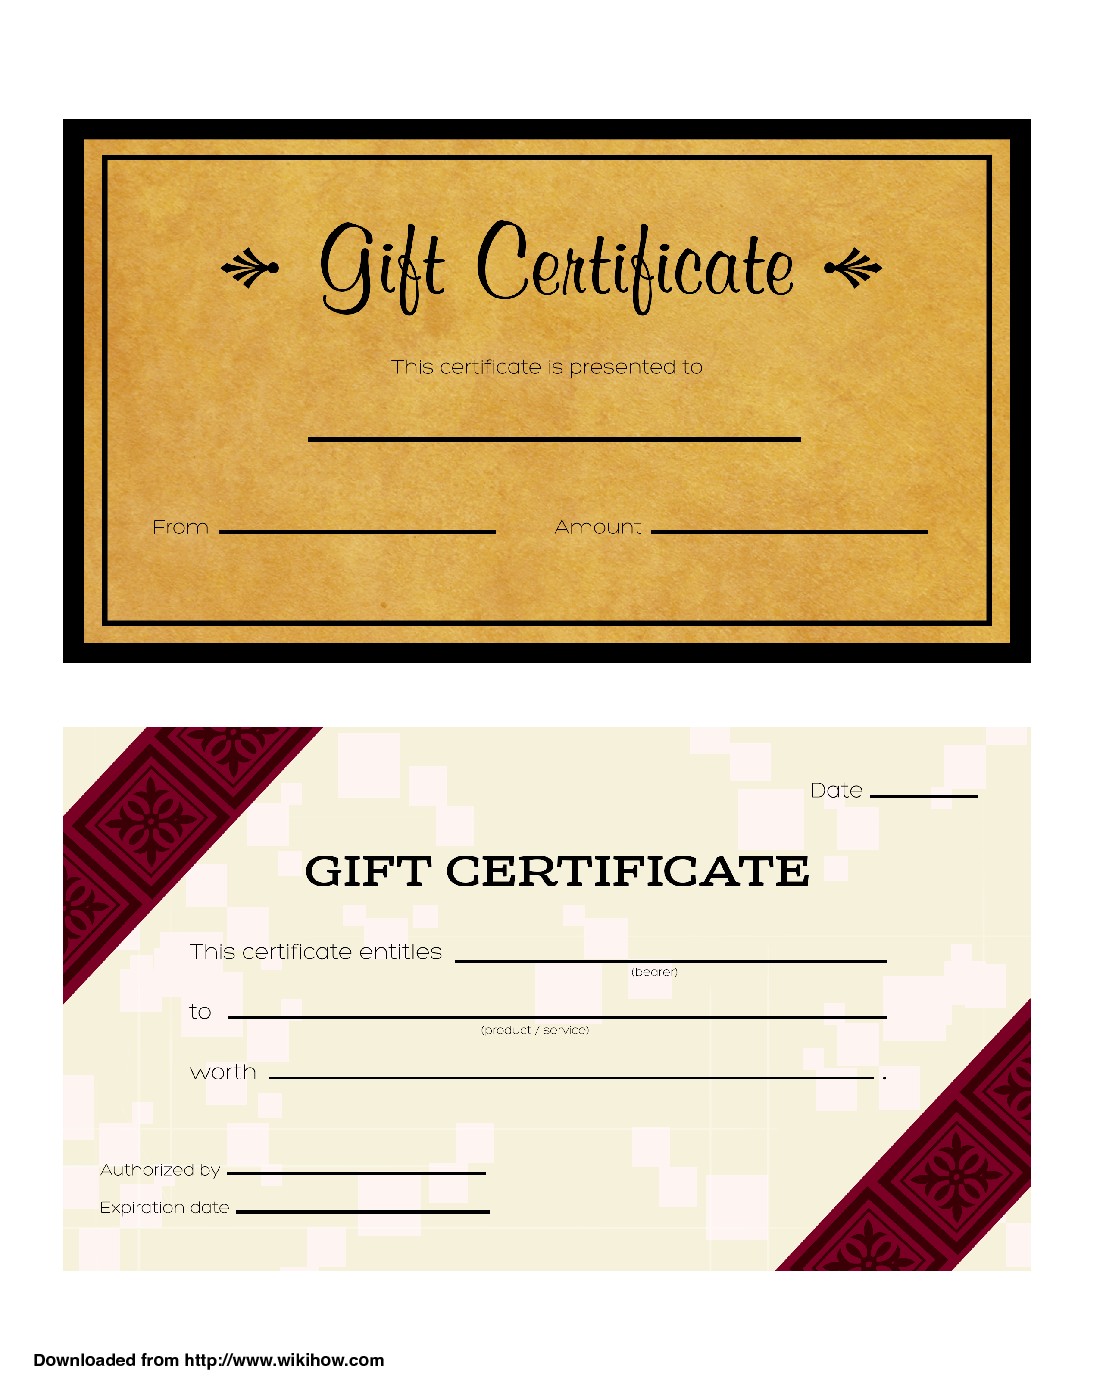 3 Ways To Make Your Own Printable Certificate WikiHow Design Online Free